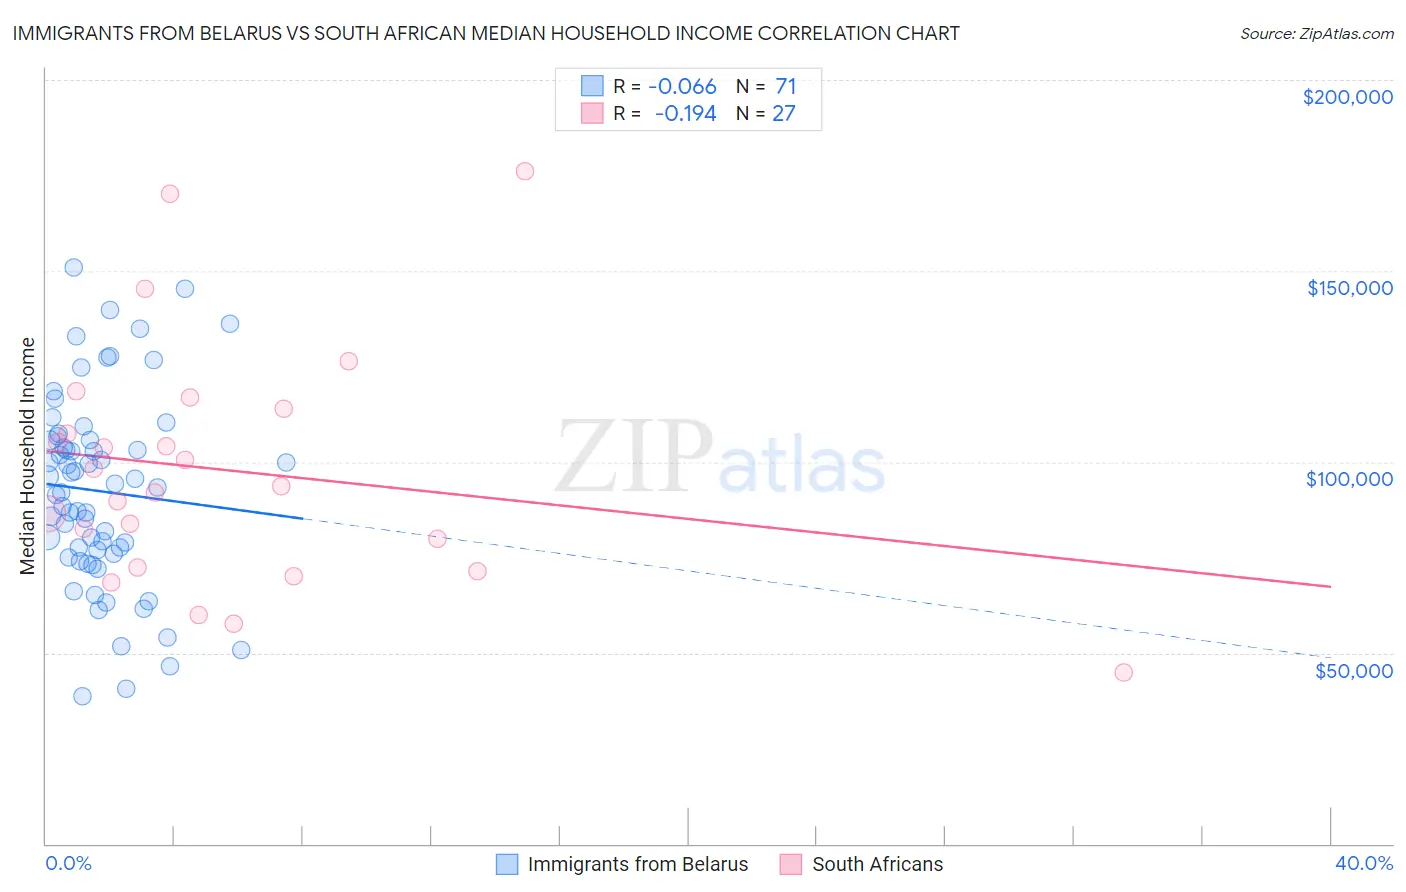 Immigrants from Belarus vs South African Median Household Income